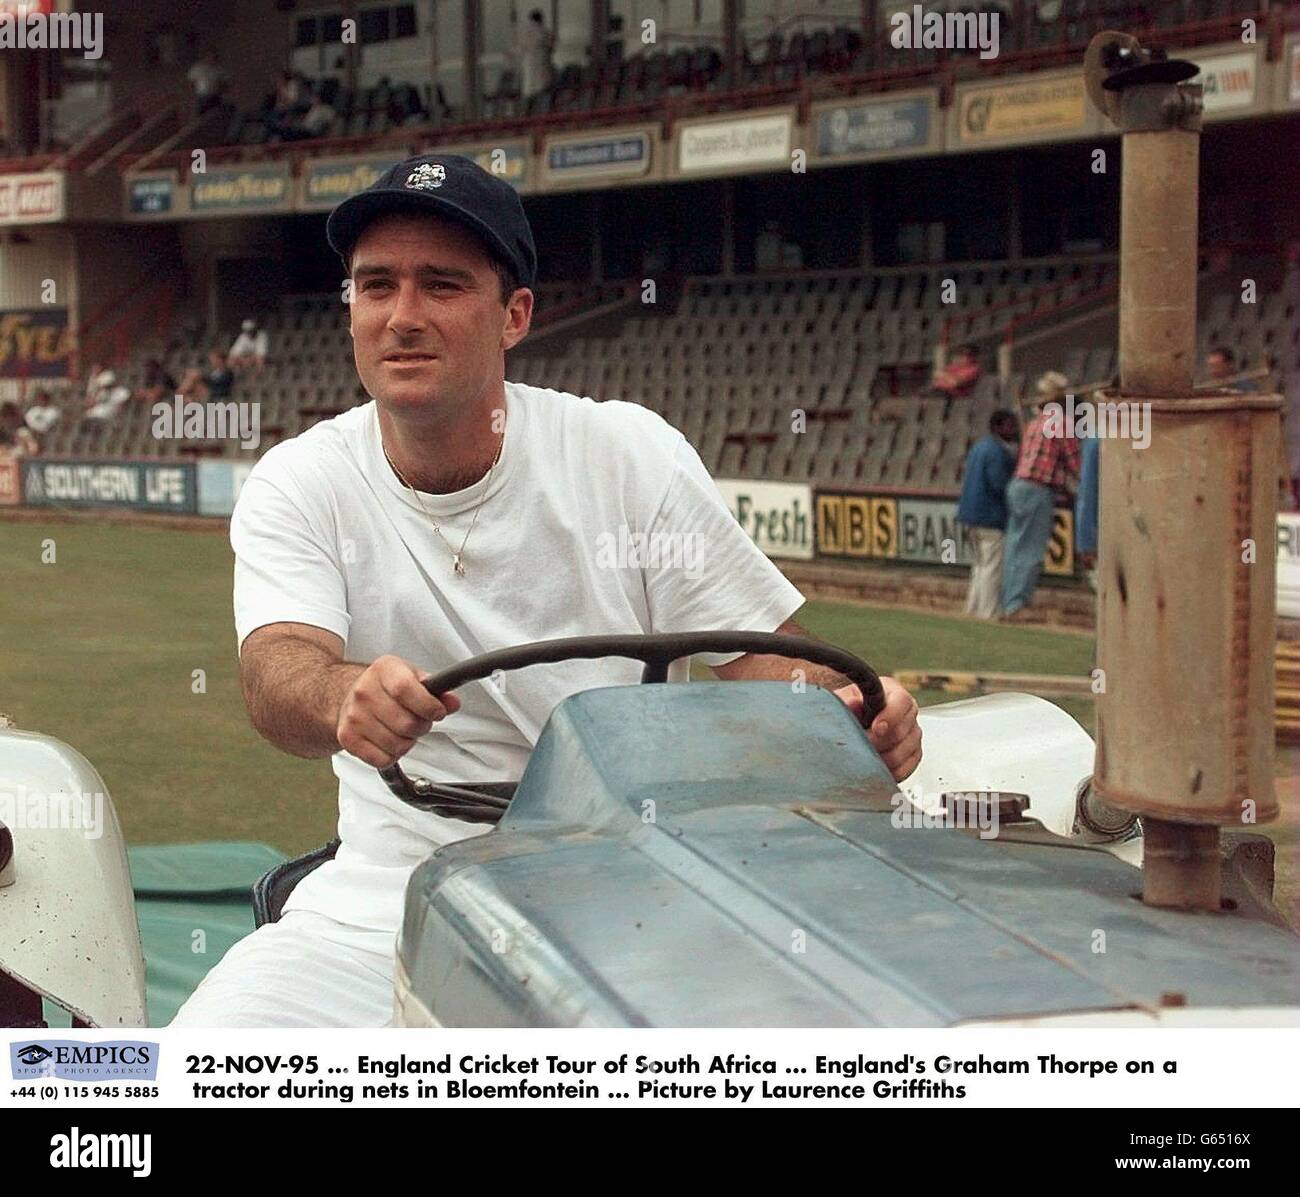 22-NOV-95. England Cricket Tour of South Africa. England's Graham Thorpe on a tractor during nets in Bloemfontein. Picture by Laurence Griffiths Stock Photo